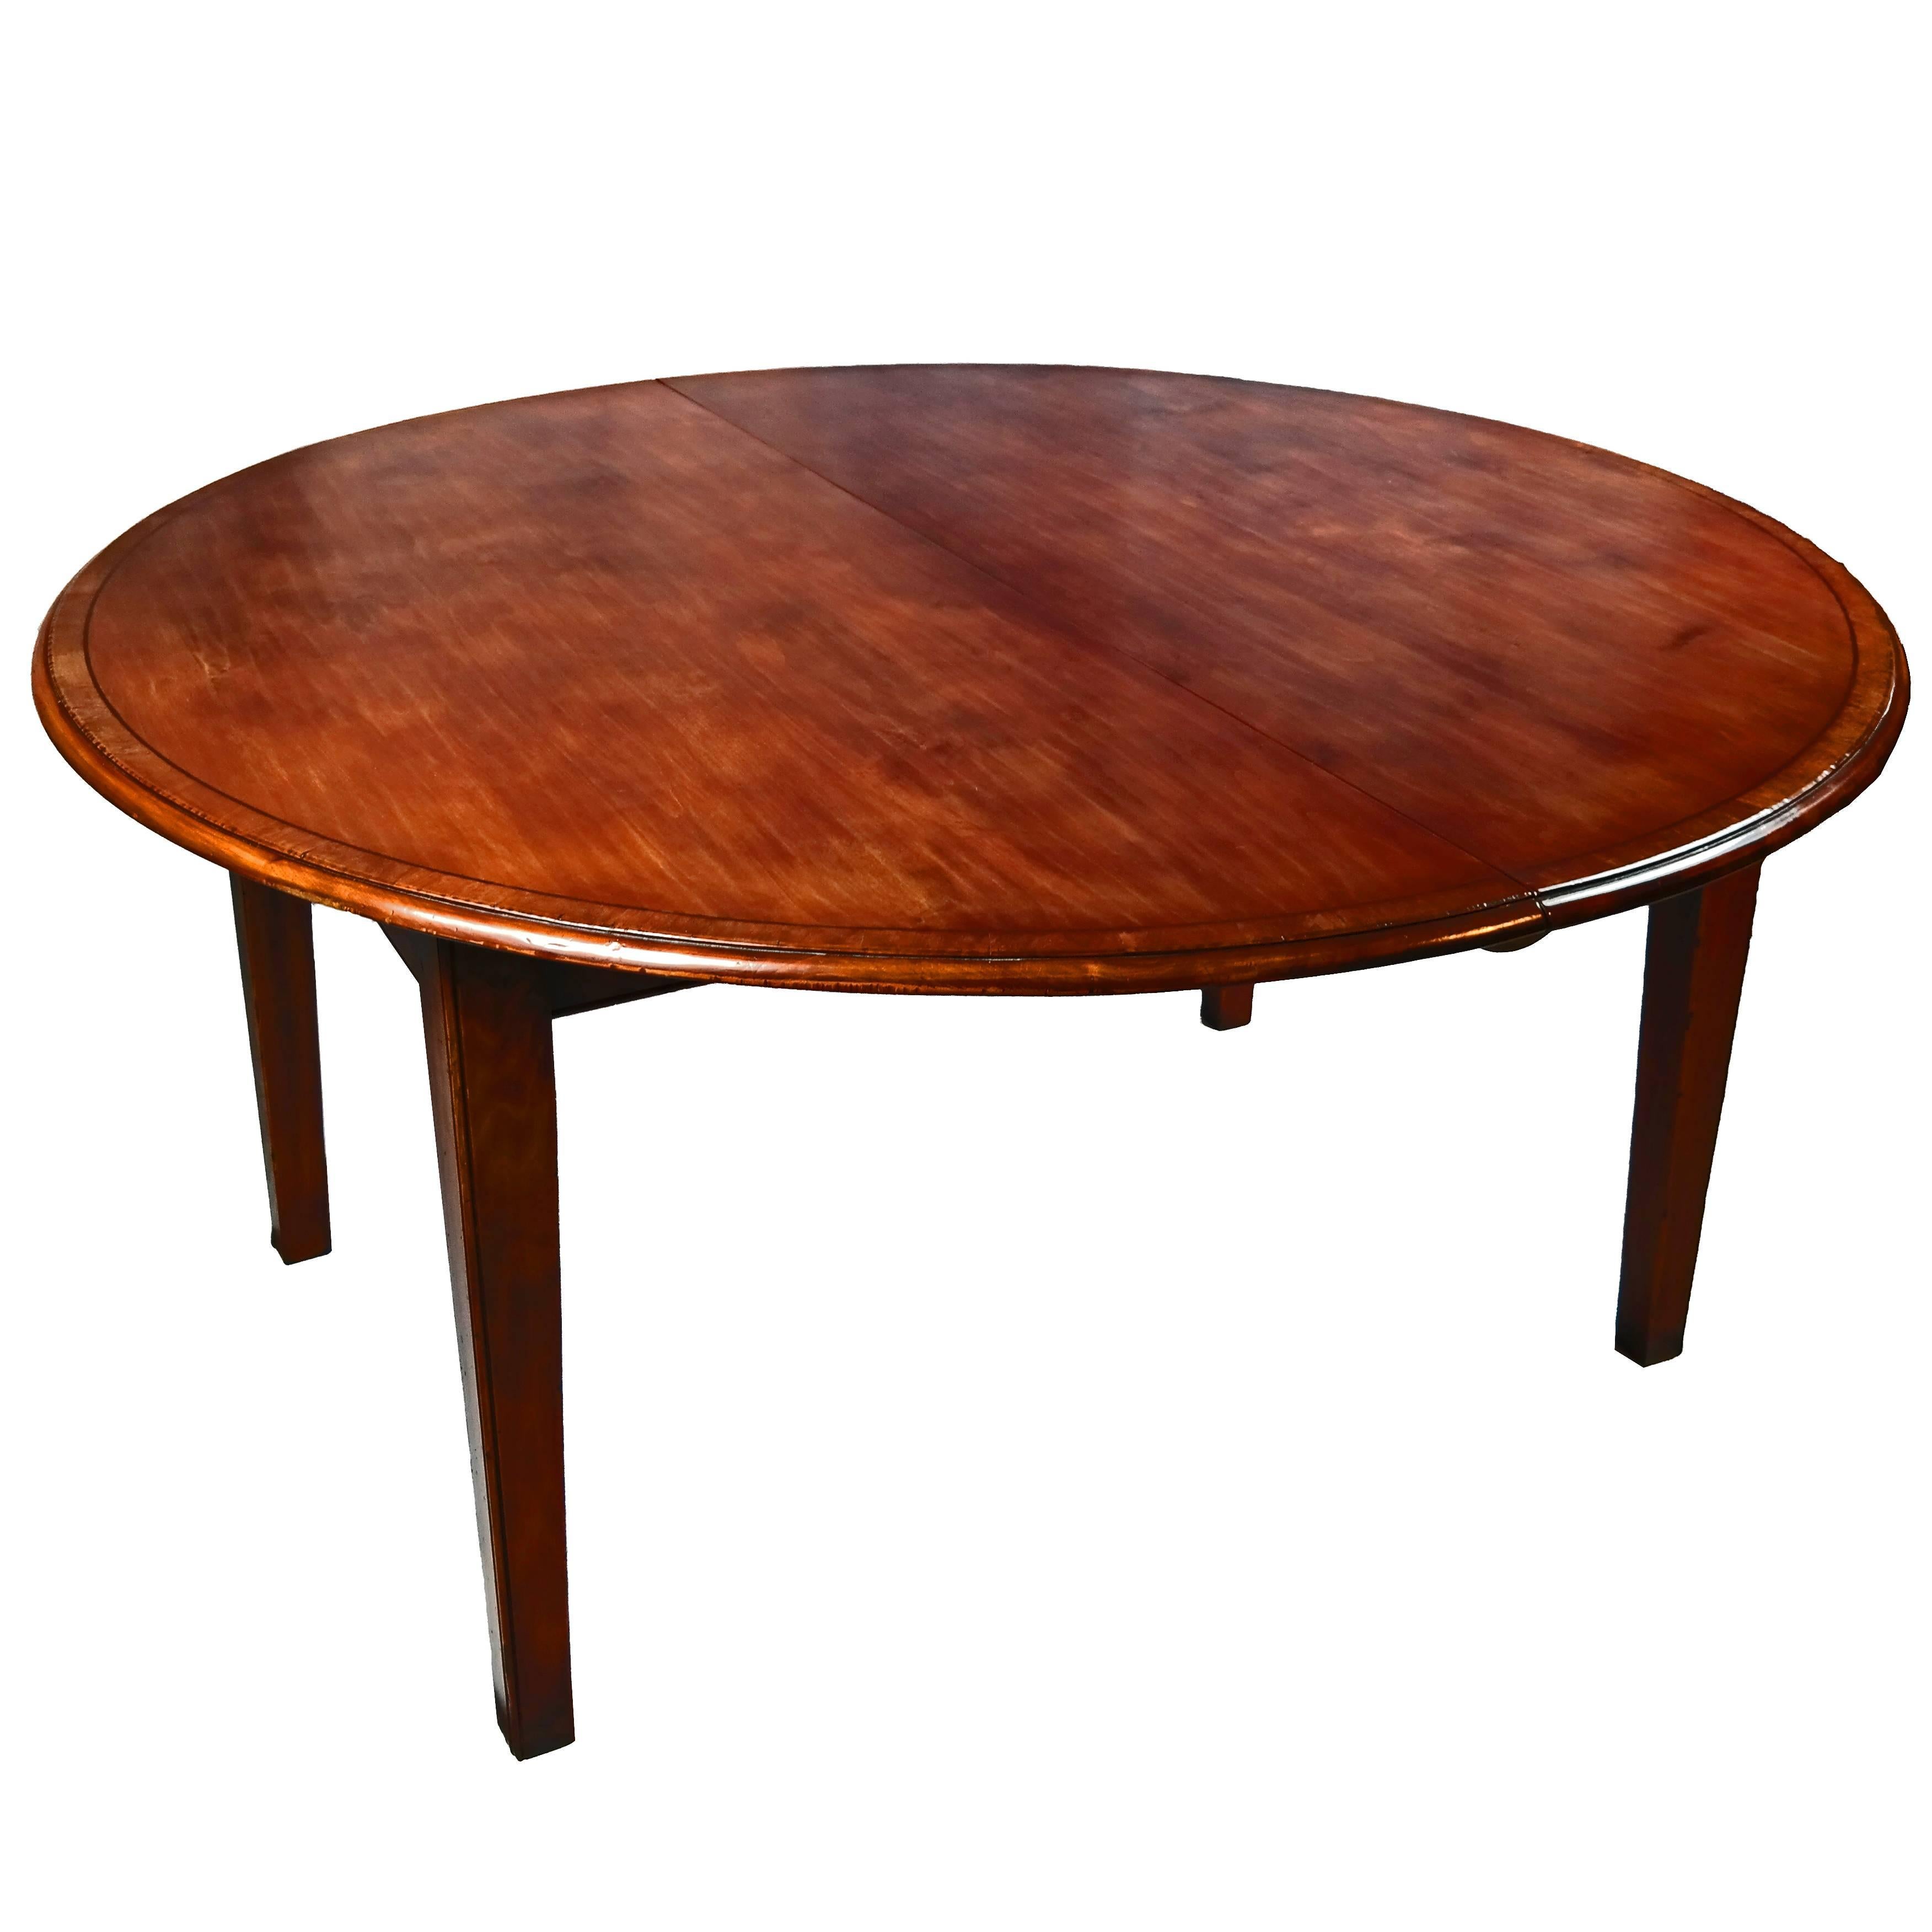 Round Cherry Yewwood-Banded Dining Table